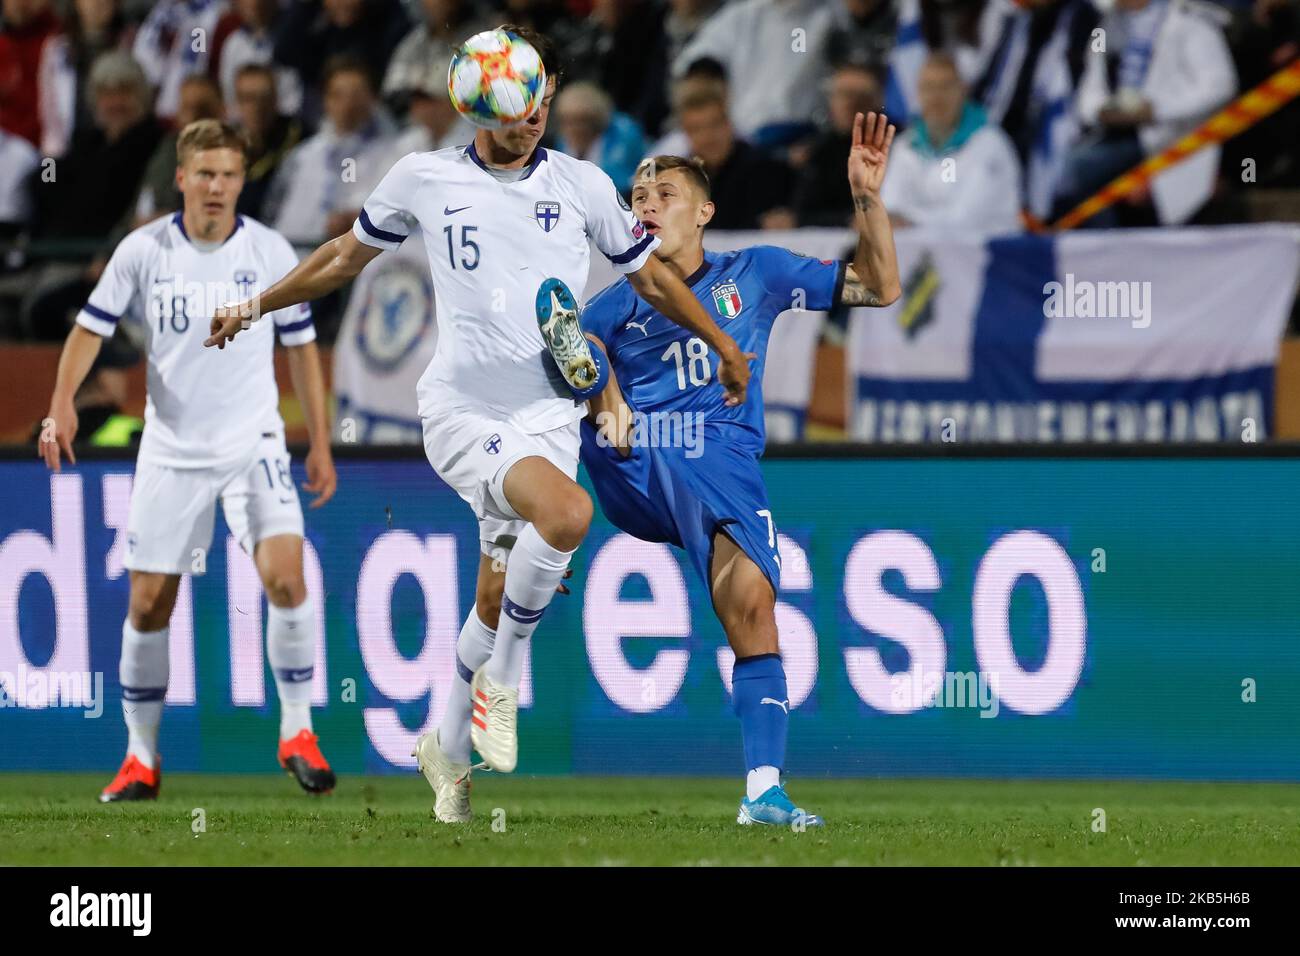 Sauli Vaisanen (N15) of Finland and Nicolo Barella of Italy vie for the ball during UEFA Euro 2020 qualifying match between Finland and Italy on September 8, 2019 at Ratina Stadium in Tampere, Finland. (Photo by Mike Kireev/NurPhoto) Stock Photo